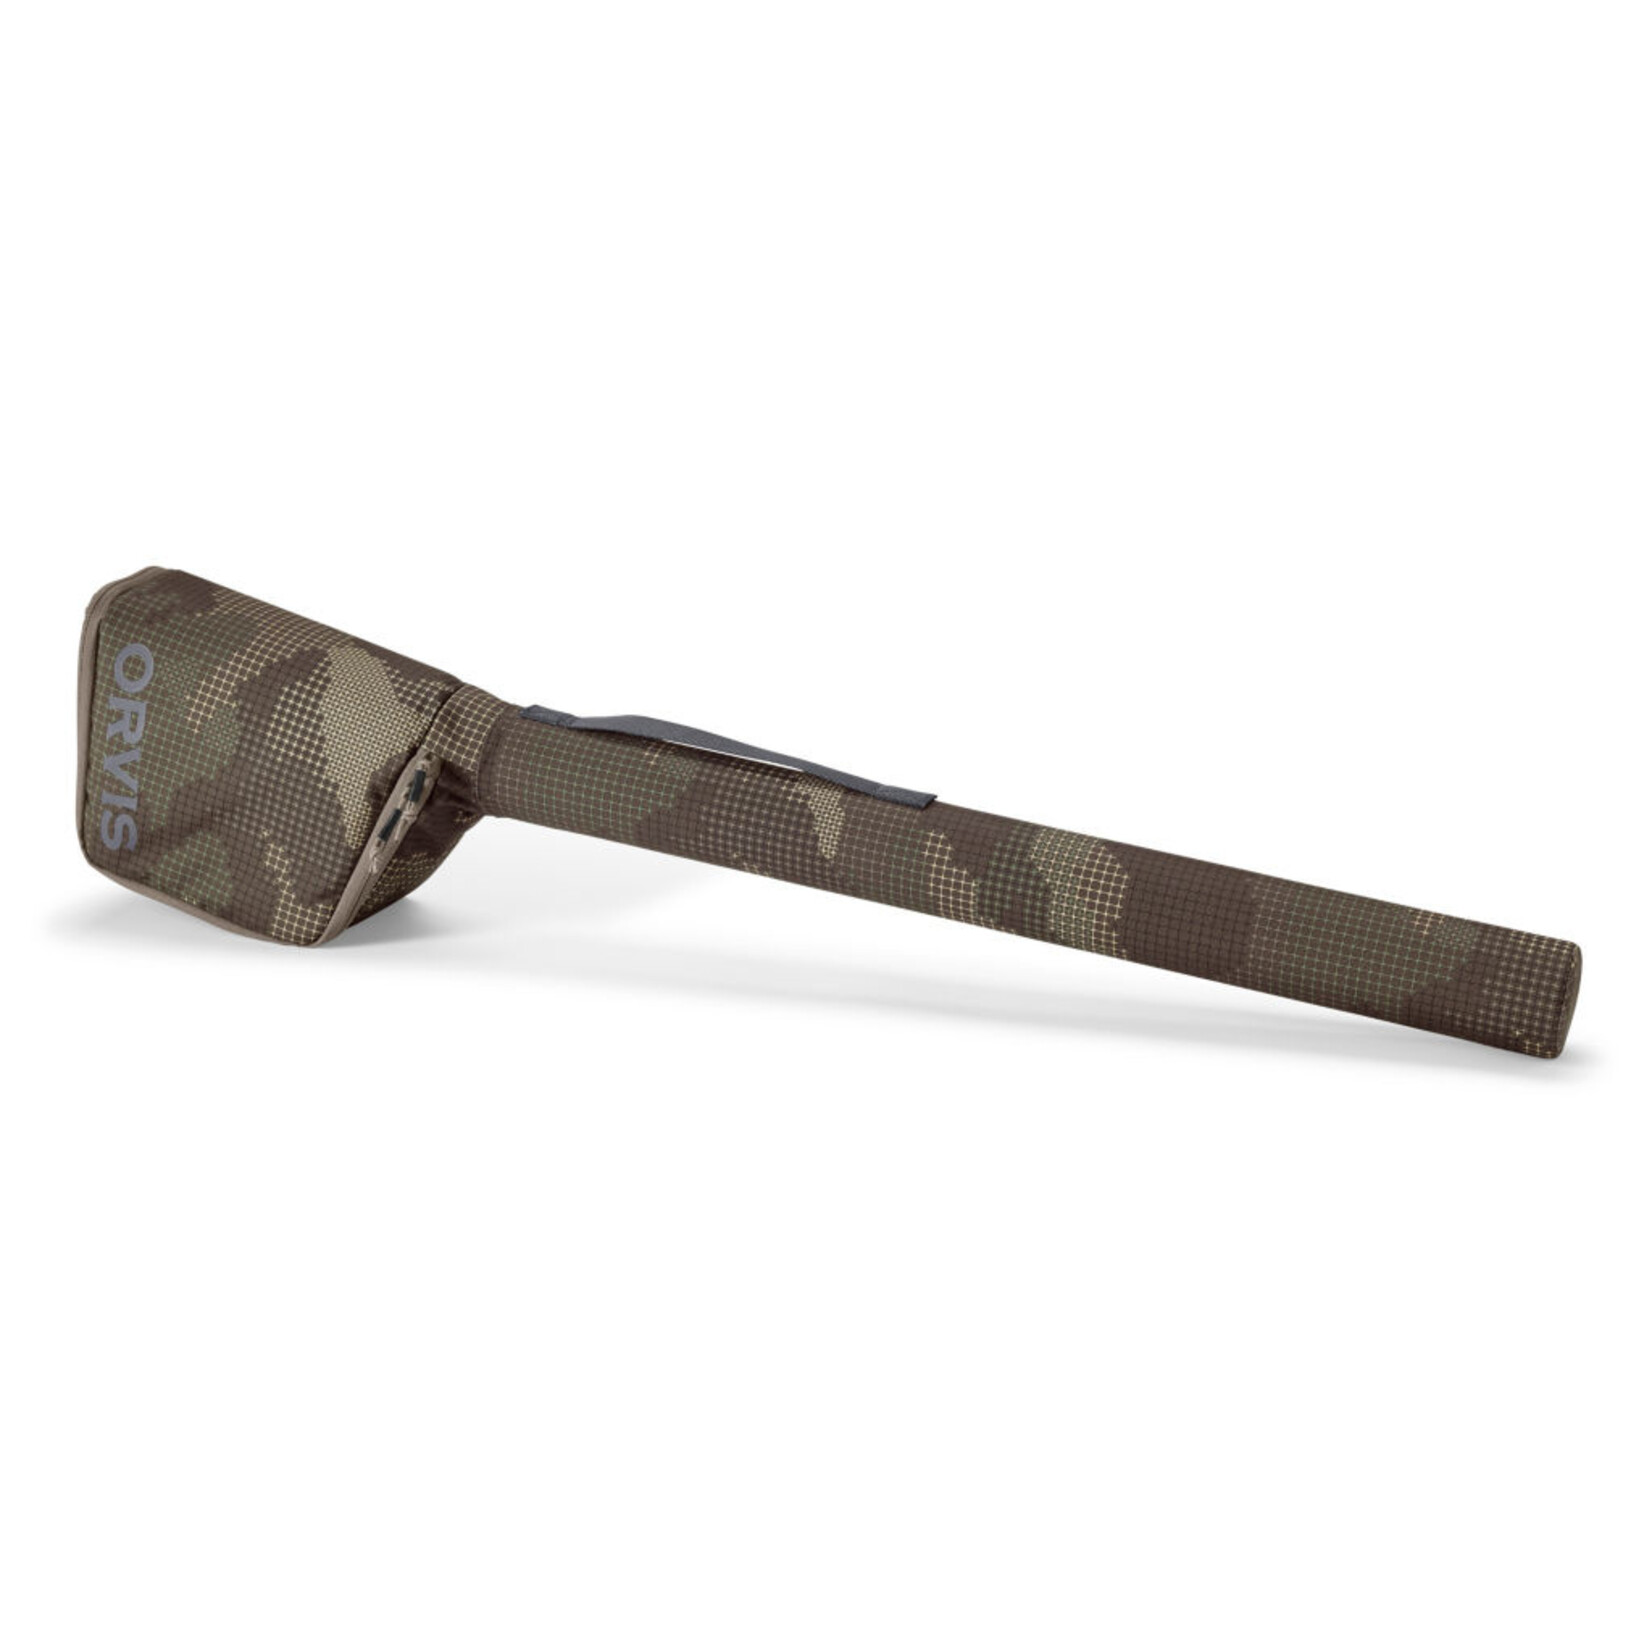 Orvis Double Fly Fishing Rod Case Camo - Black Dog Outdoor Sports